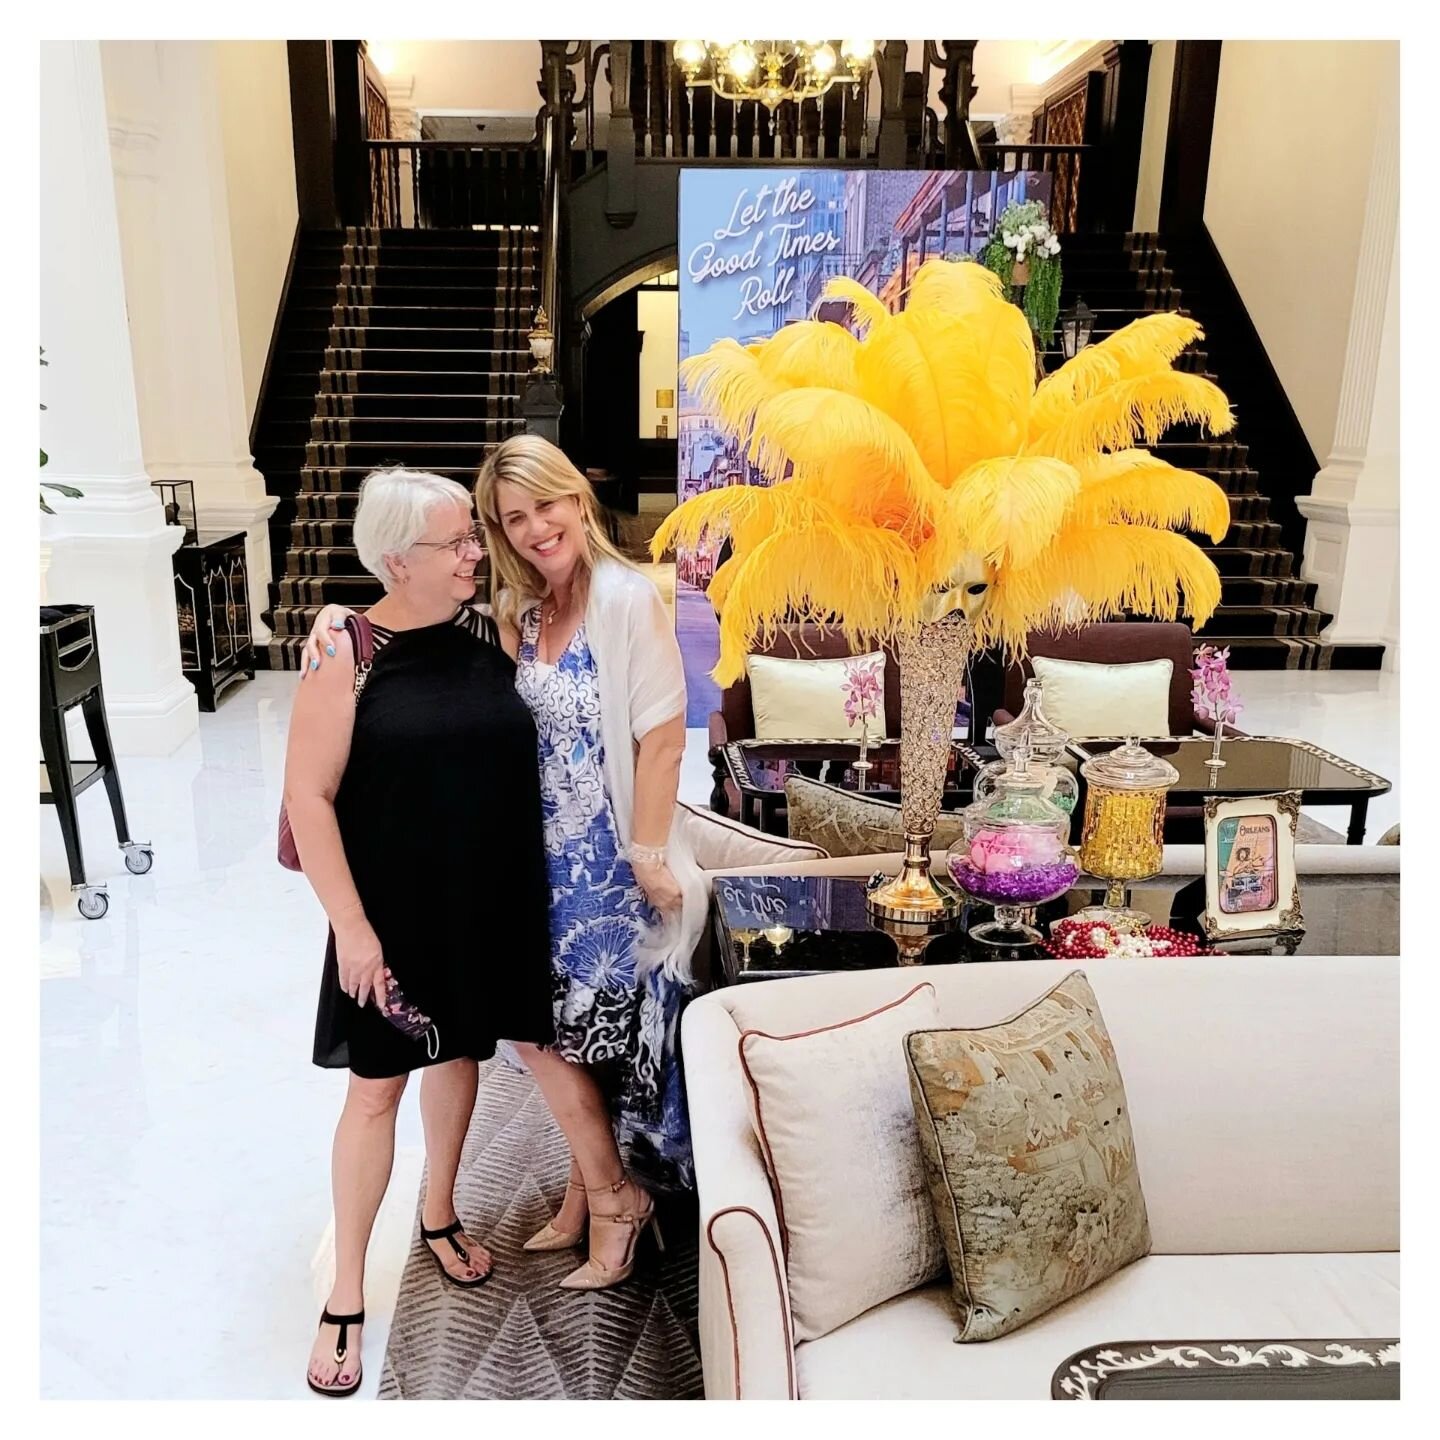 Let the Good Times roll!

Fun, Friends, Laughter, High Teas, Singapore Slings, so many memories made in Singapore. 🇸🇬 

This photo was taken with one of my good friends Michelle, at @raffleshotelsingapore after we enjoyed a delicious high tea. So m